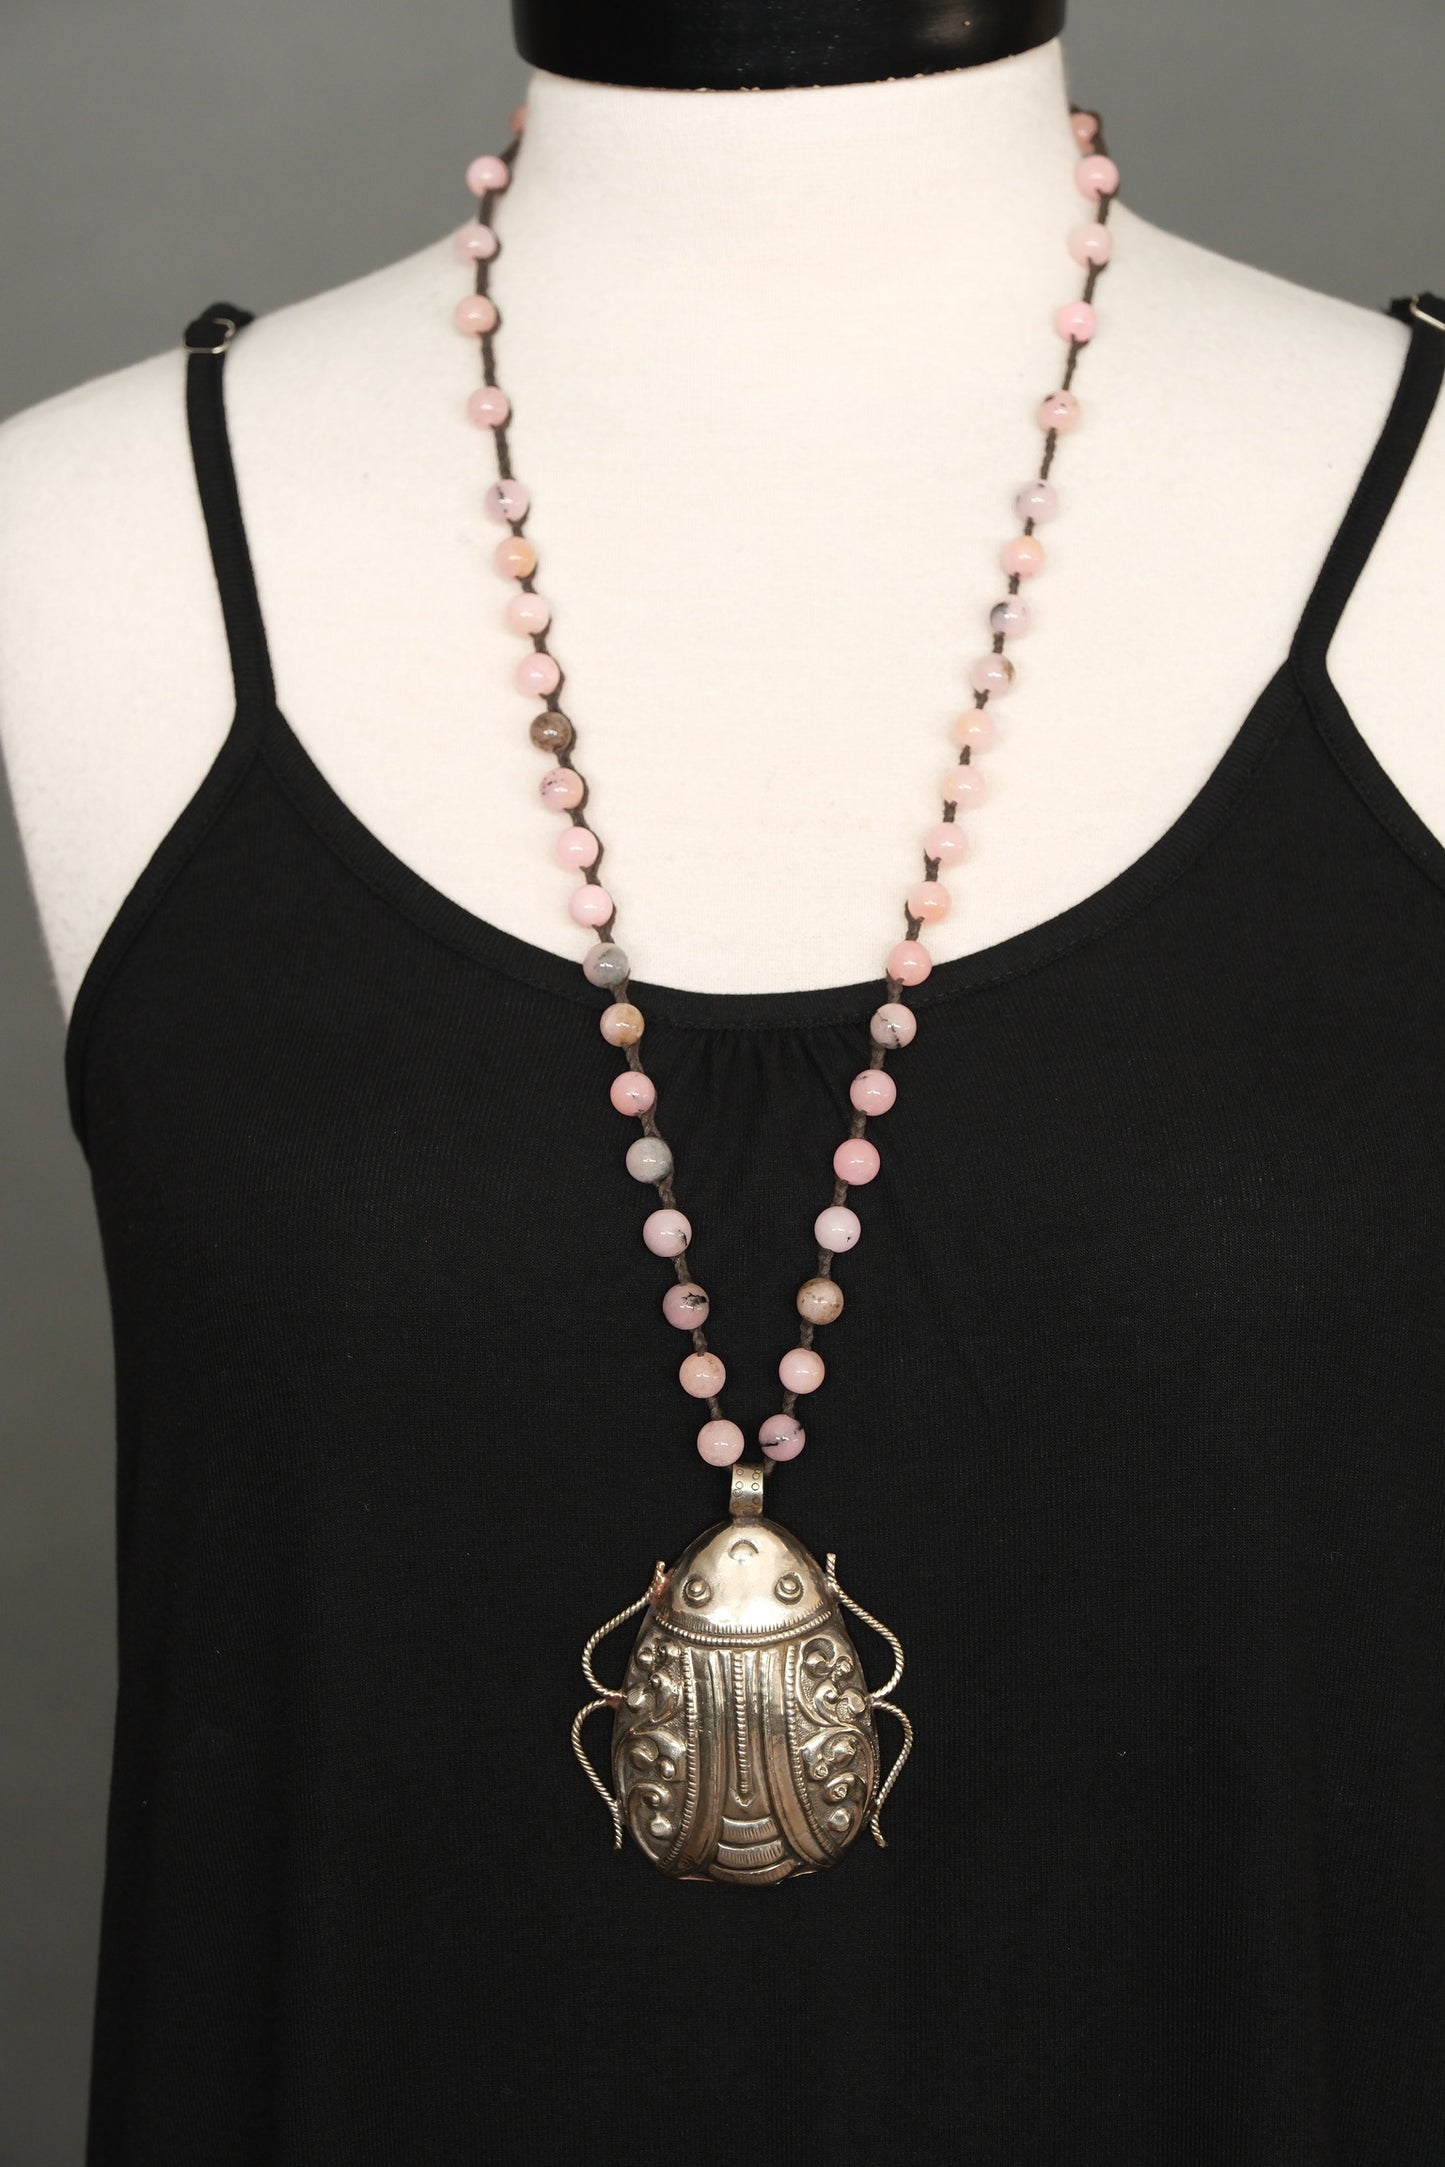 Beetle Pendent Necklace with Pink Opal Beads